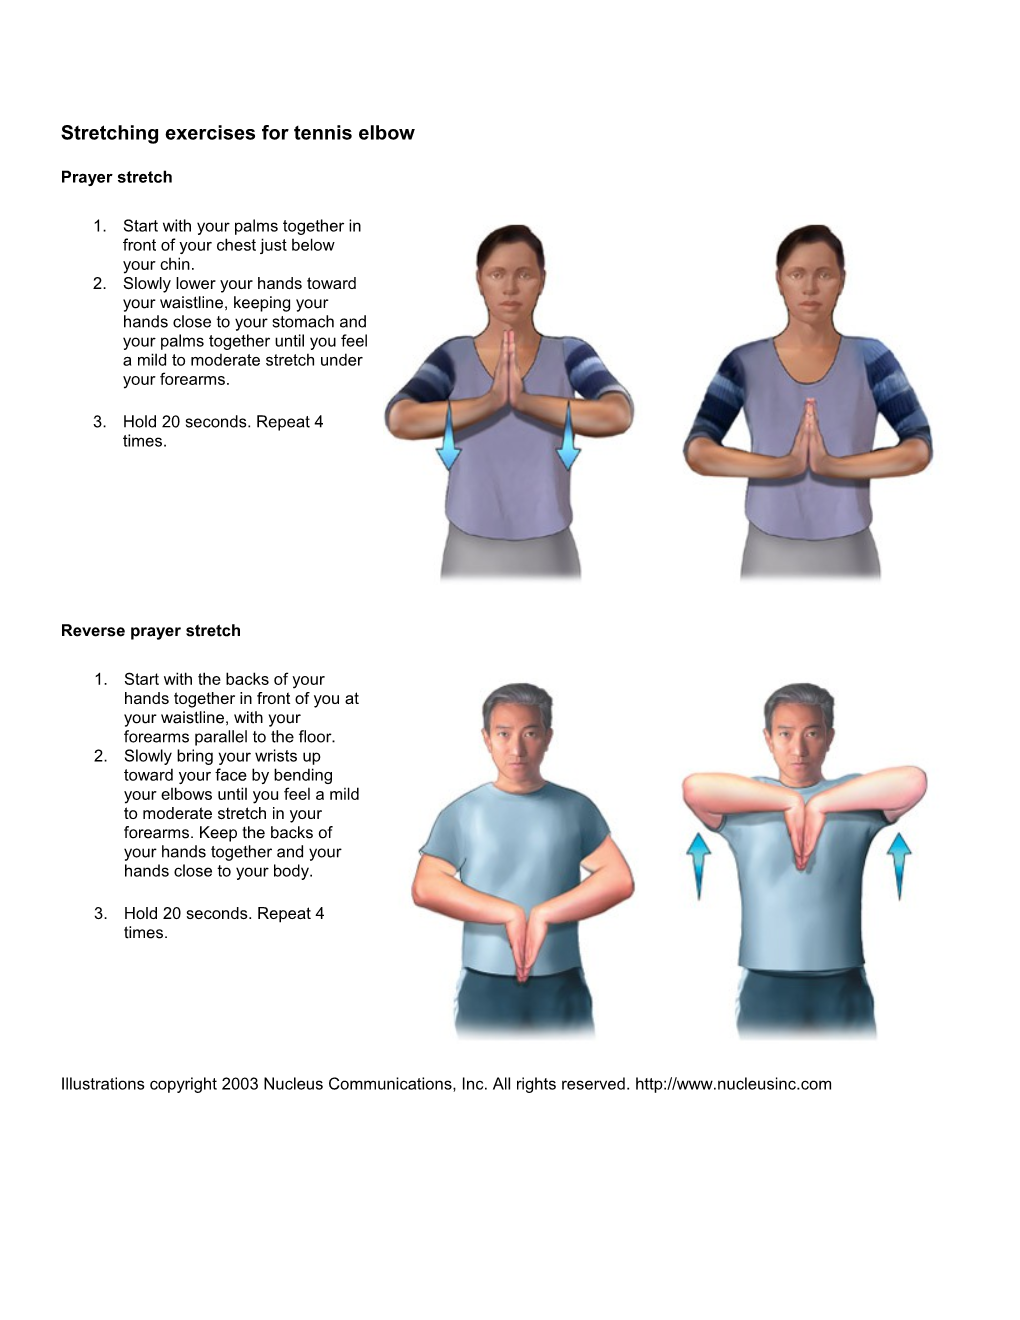 Stretching Exercises for Tennis Elbow